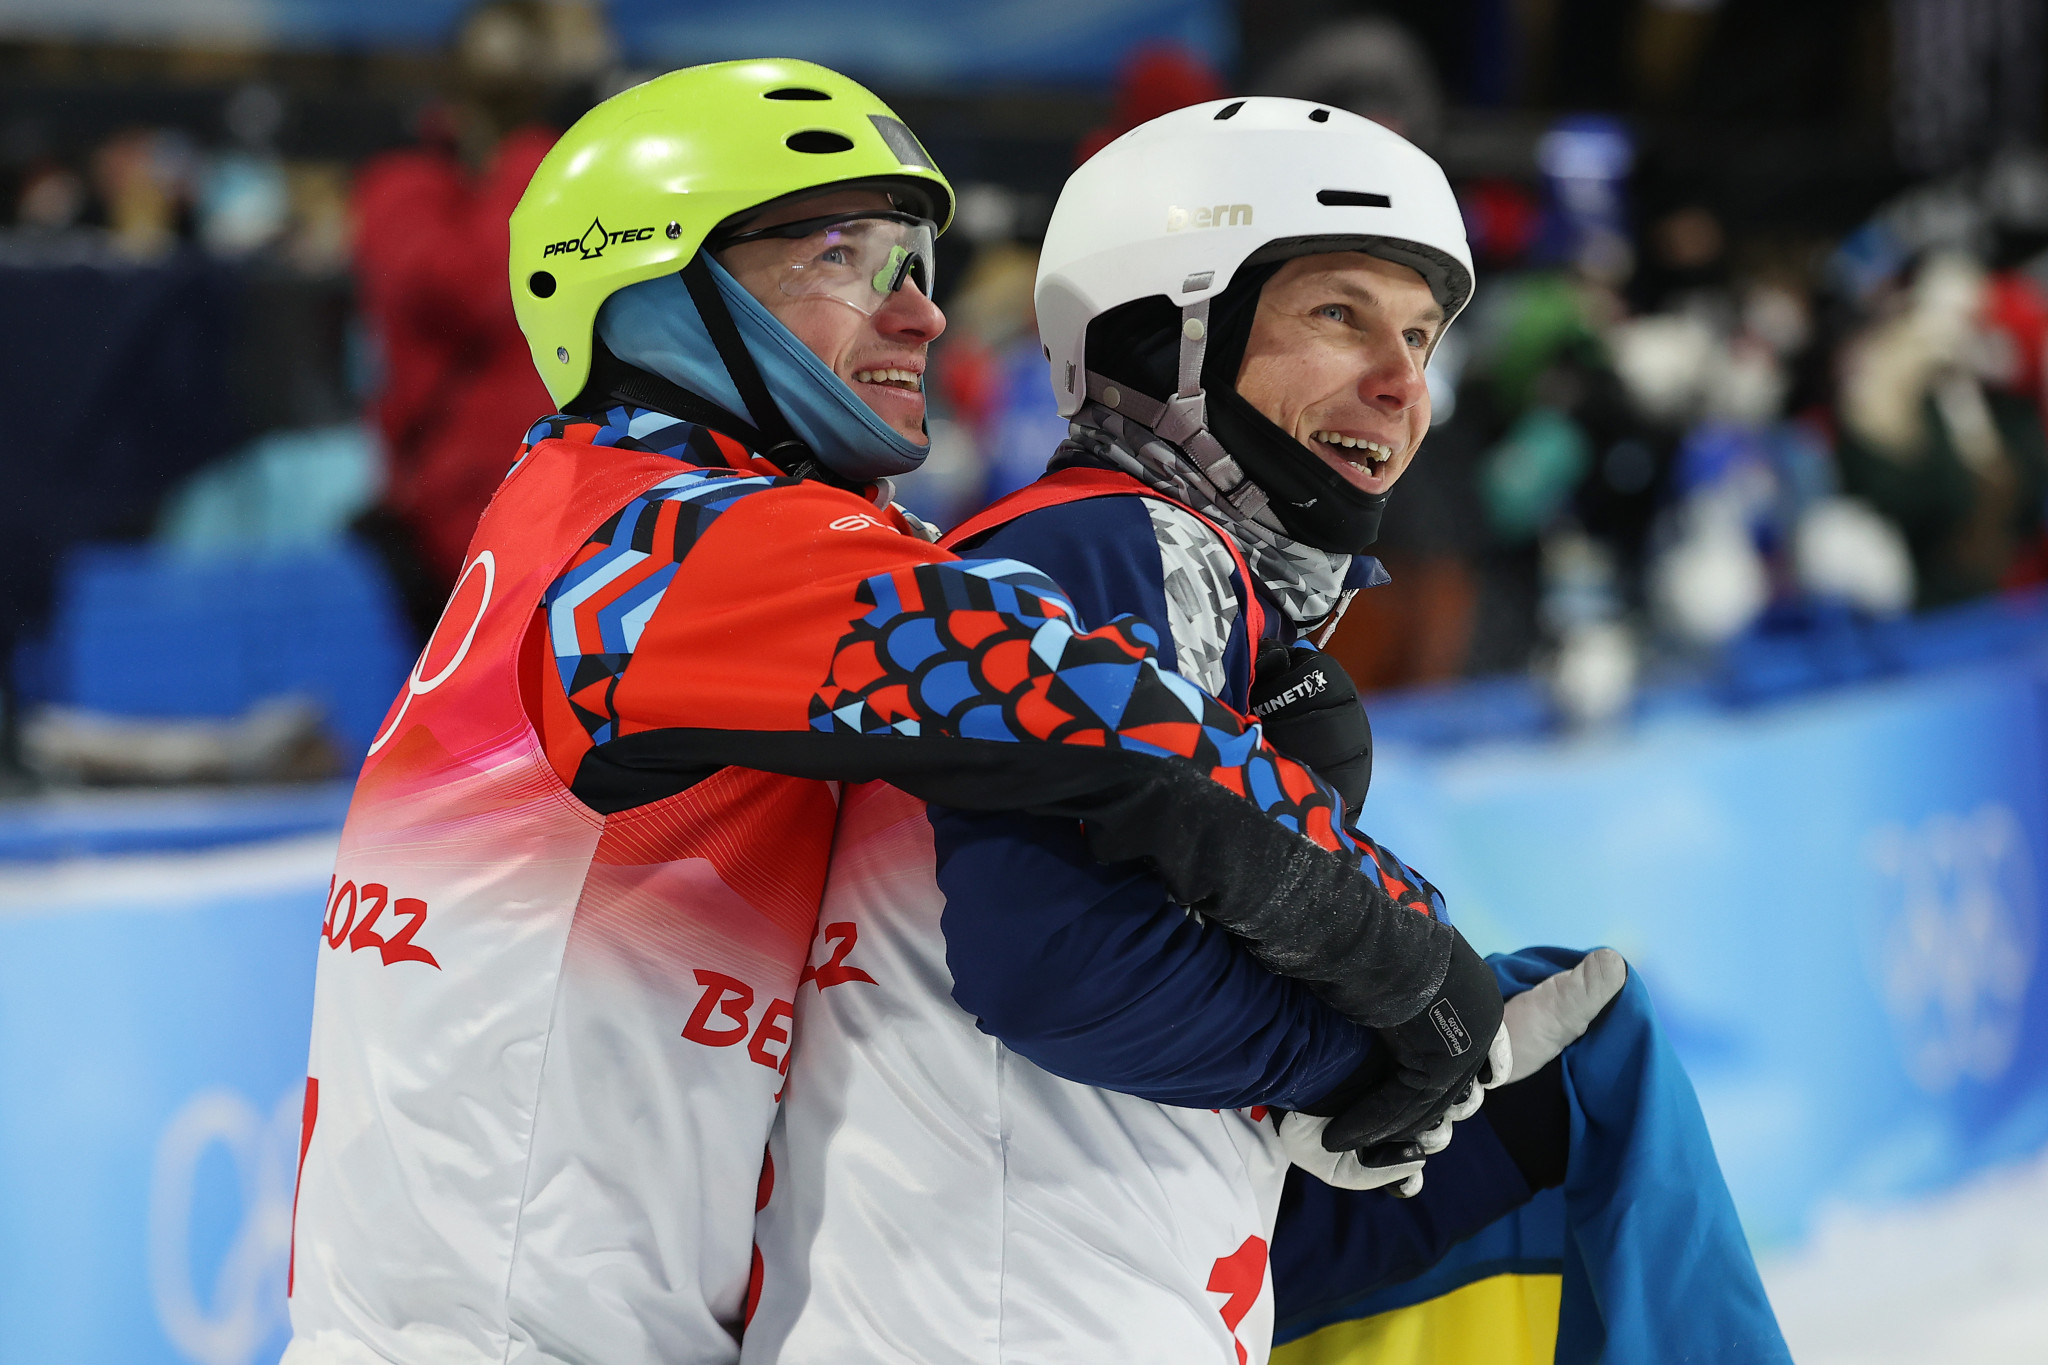 ROC athlete Ilya Burov and Ukraine’s Alexander Abramenko celebrated together amid tension between the two nations ©Getty Images